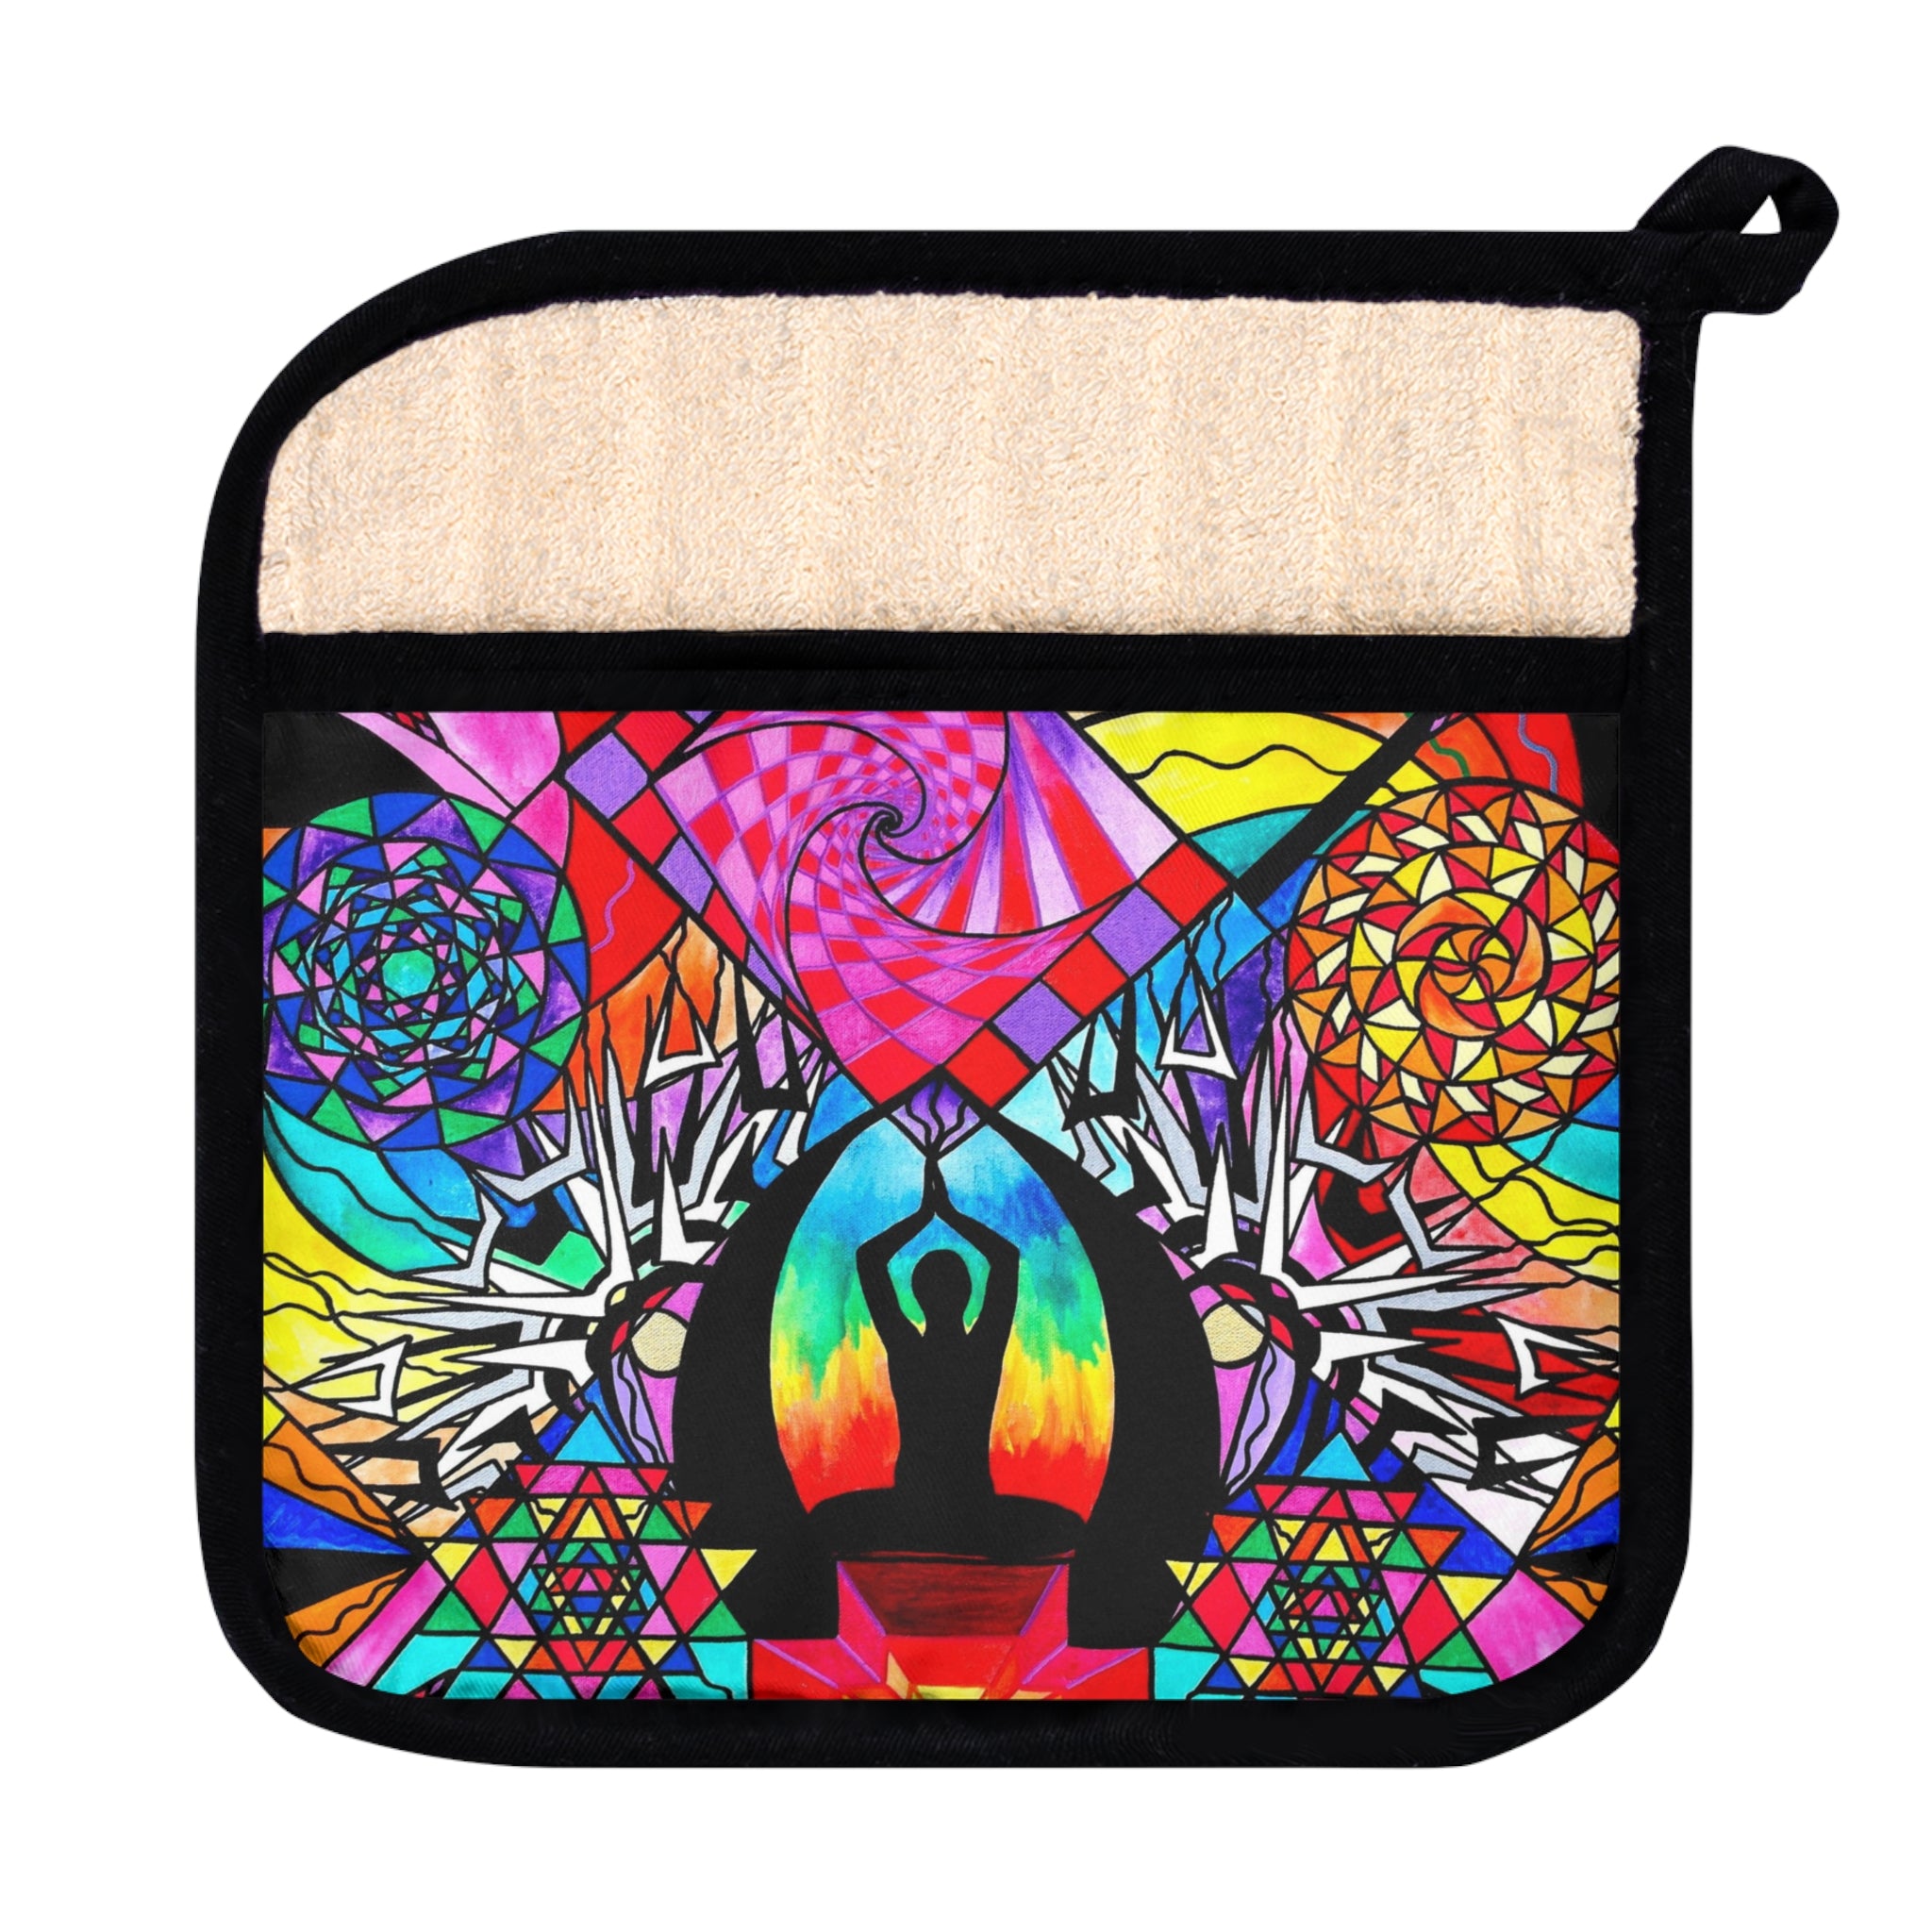 the-most-stylish-and-affordable-meditation-aid-pot-holder-with-pocket-online-hot-sale_1.jpg